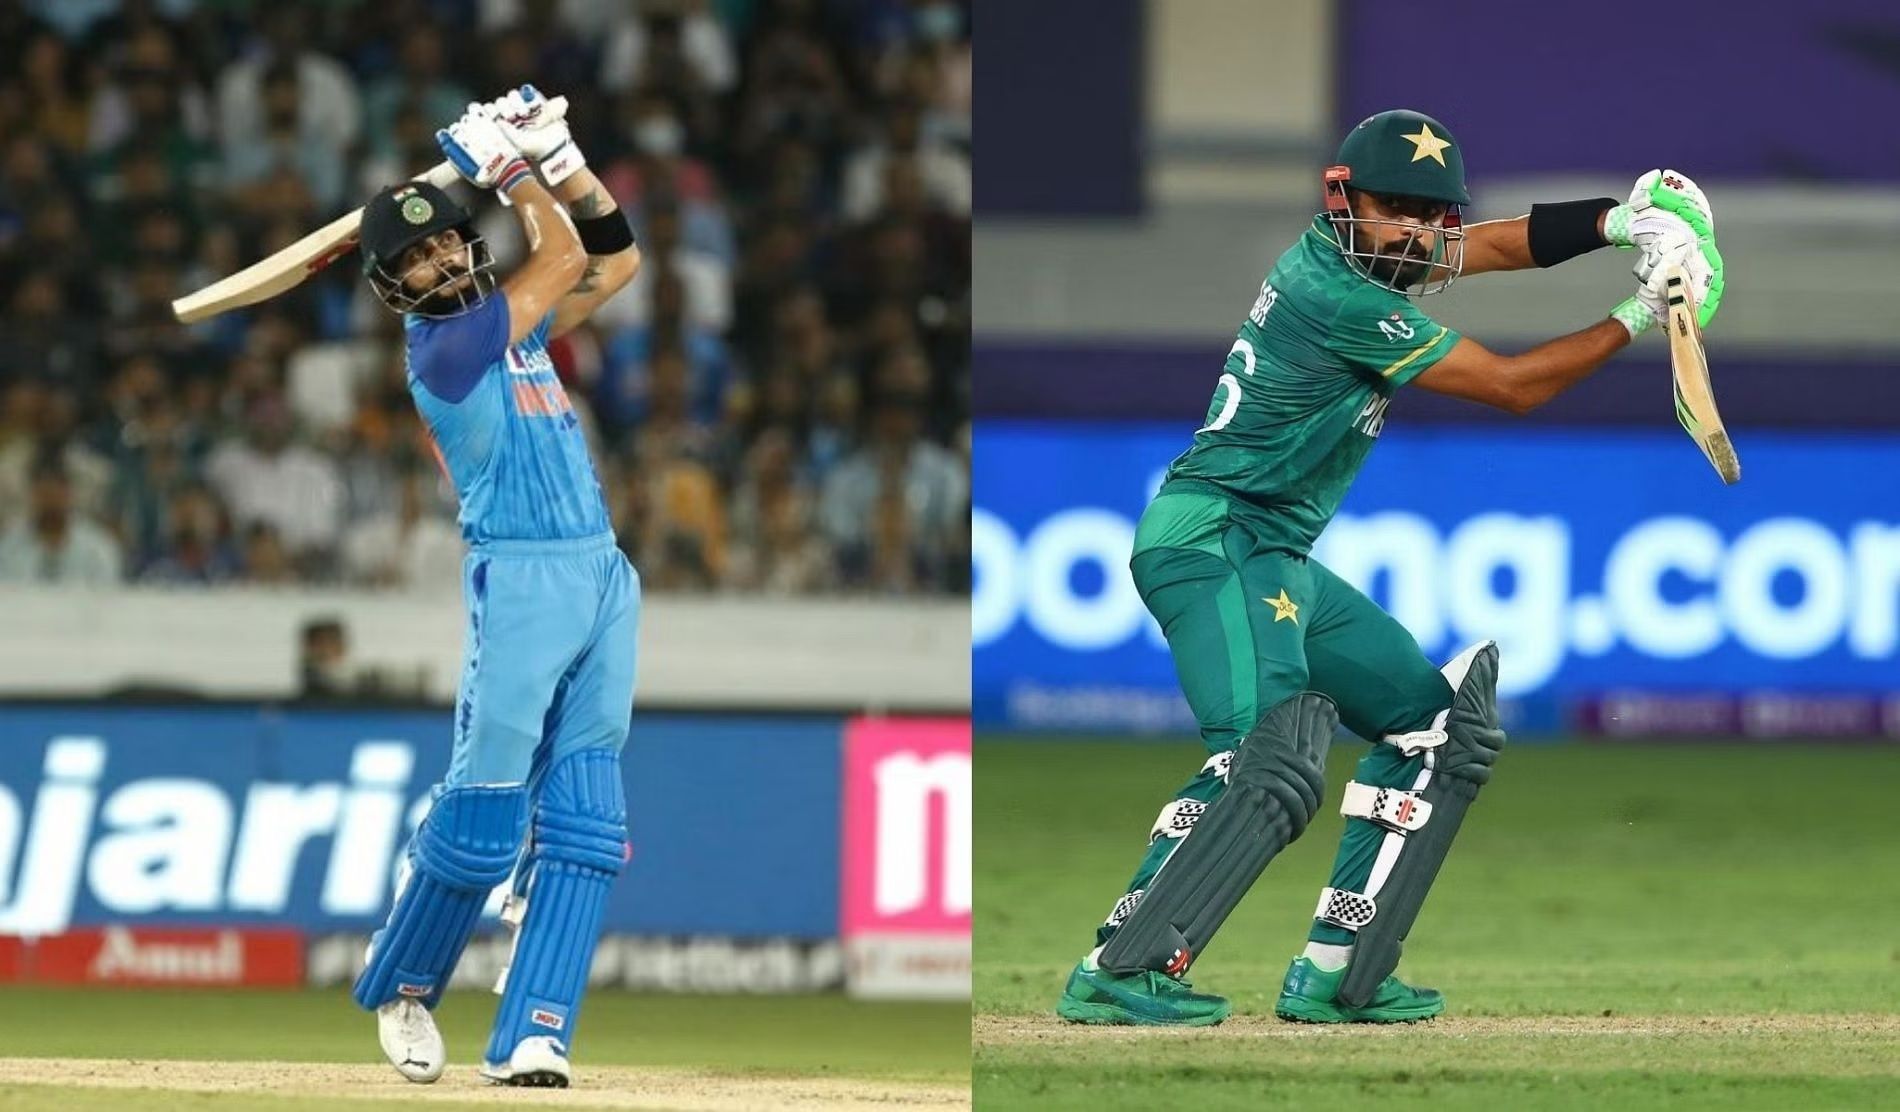 Virat Kohli and Babar Azam are two of the most accomplished batters across formats.